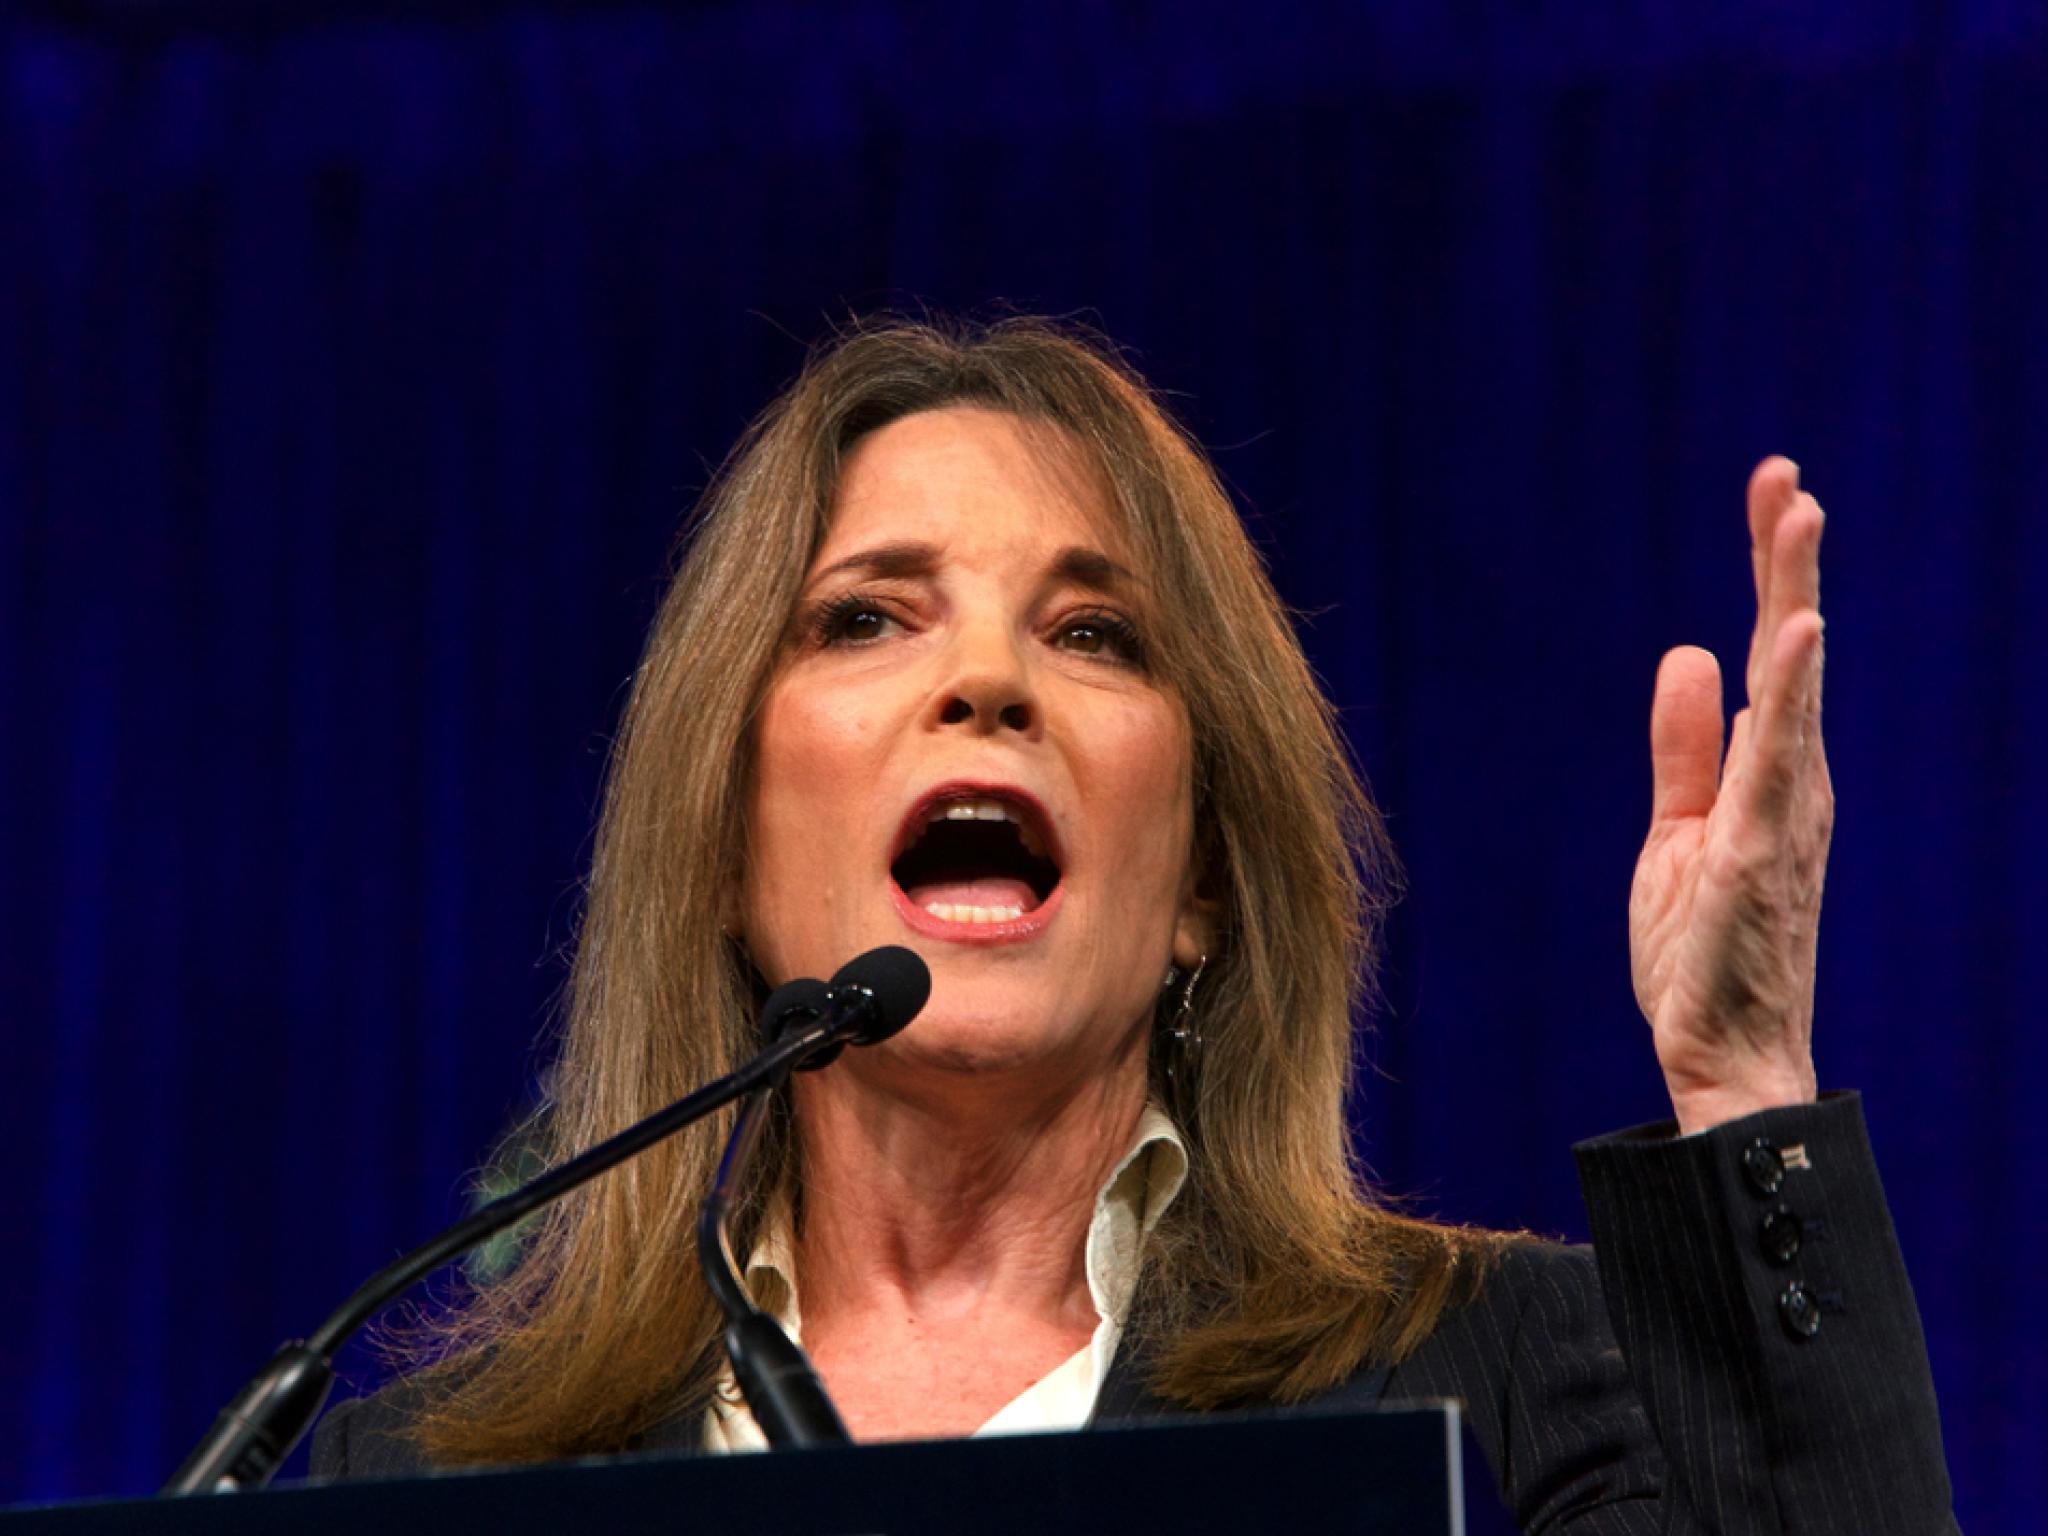  presidential-hopeful-marianne-williamson-calls-for-trimming-defense-budget-by-20-system-theft-systemic-ripoff 